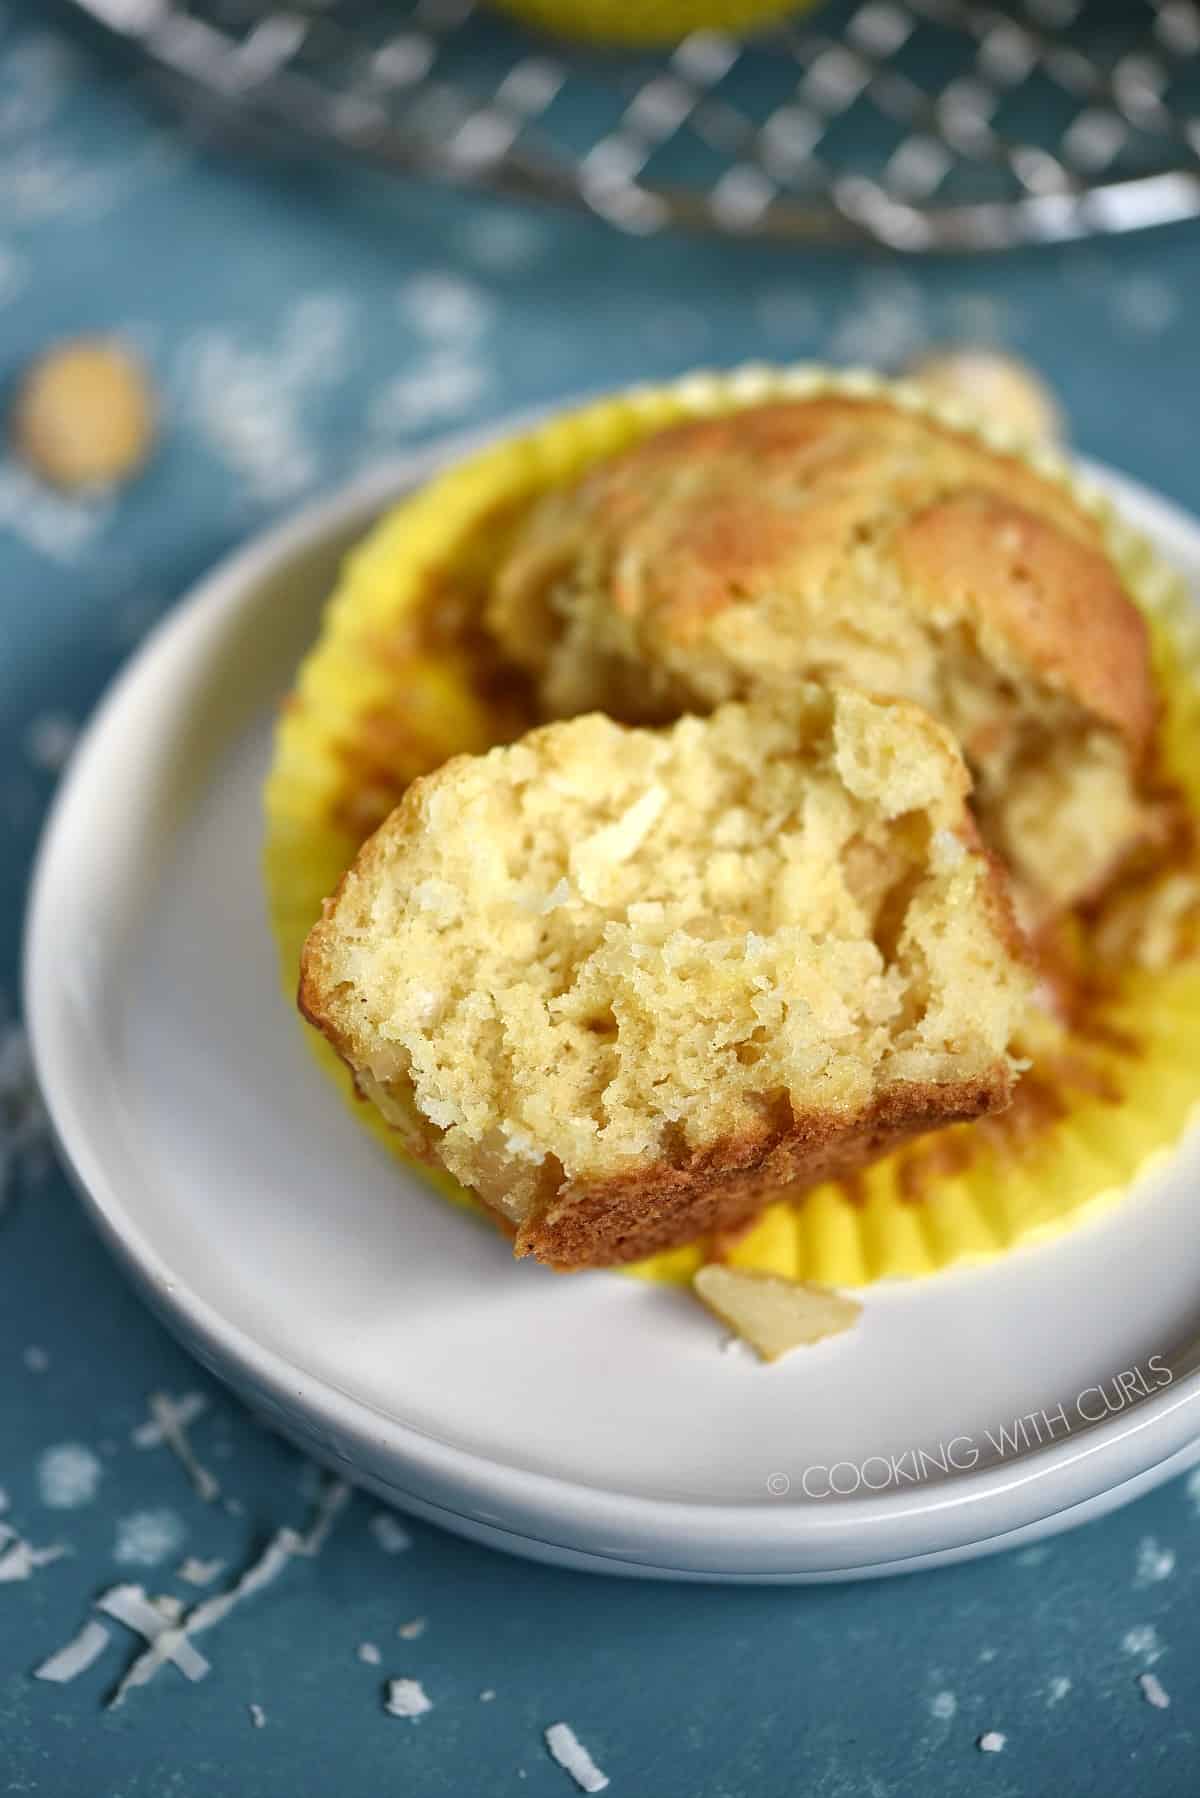 A Pina Colada Muffin split in half laying on a small white plate.